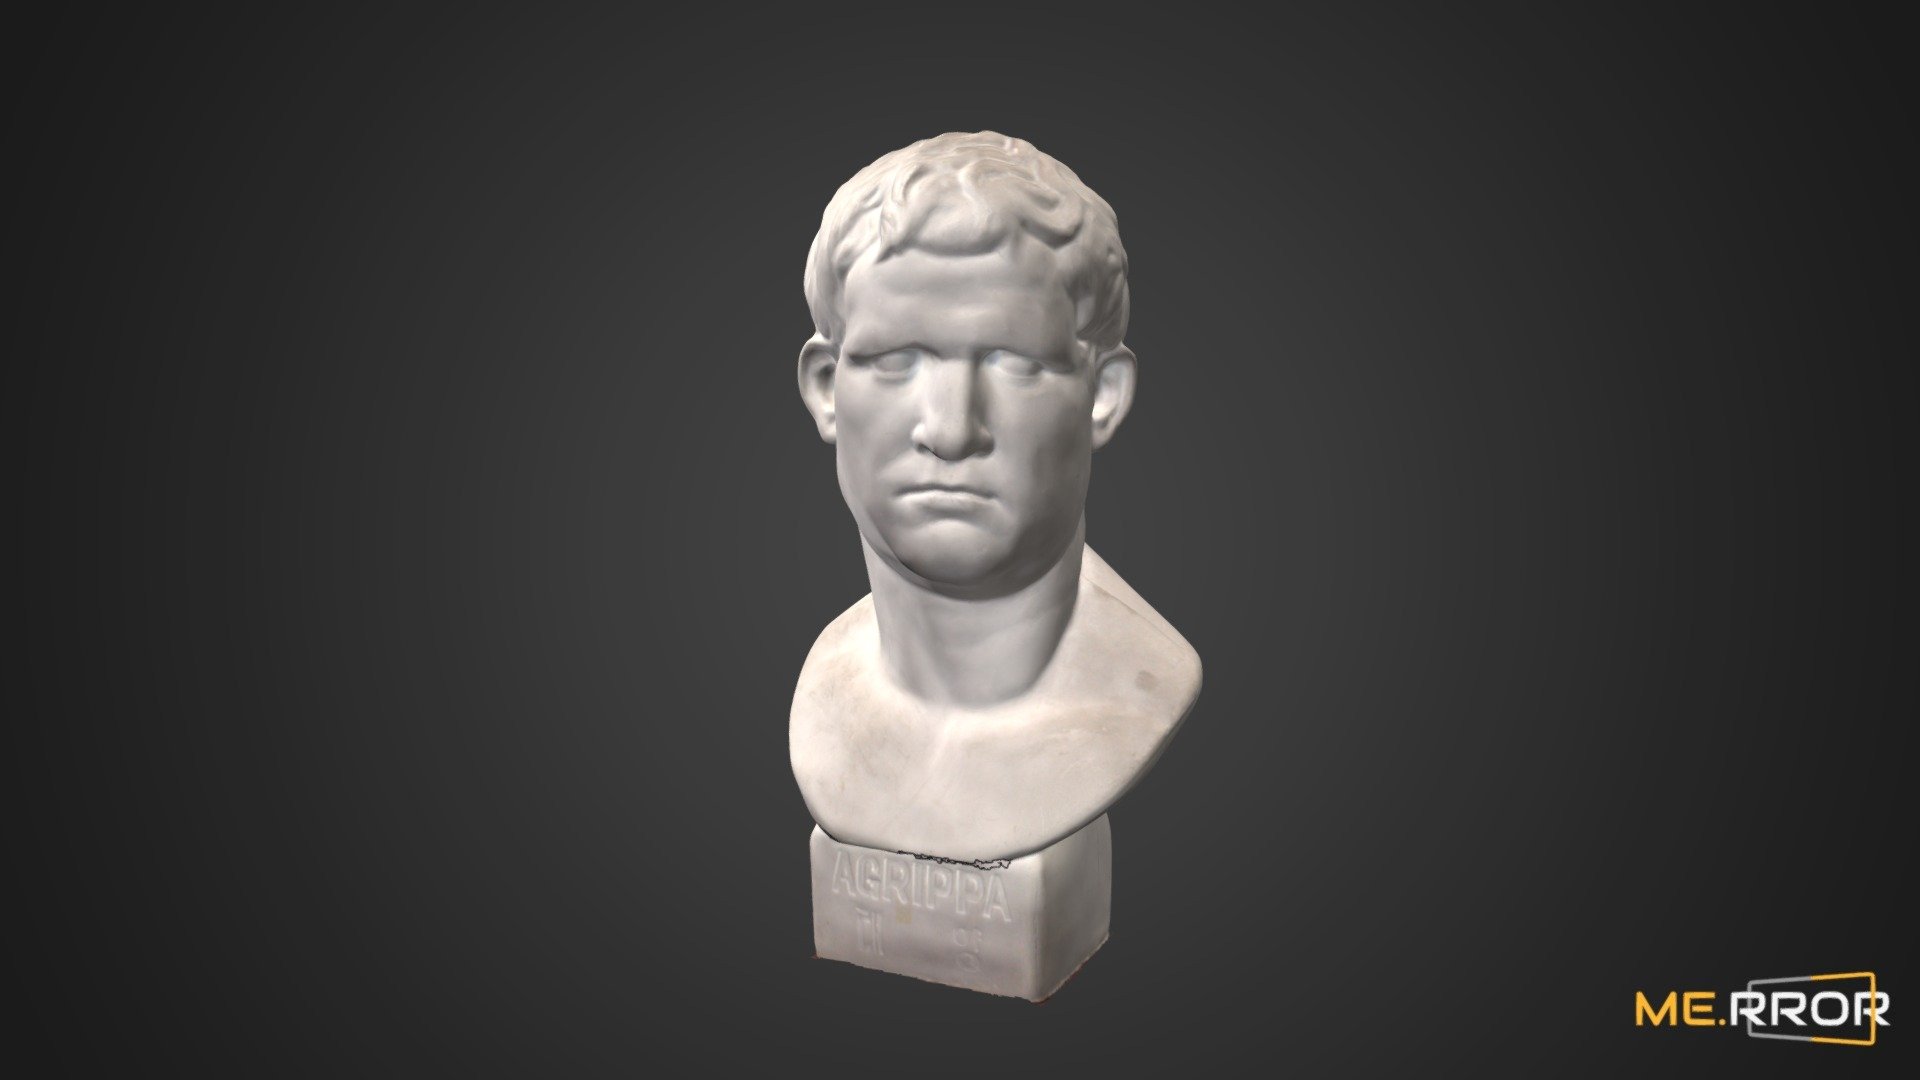 MERROR is a 3D Content PLATFORM which introduces various Asian assets to the 3D world


3DScanning #Photogrametry #ME.RROR - Plaster Cast - Buy Royalty Free 3D model by ME.RROR (@merror) 3d model